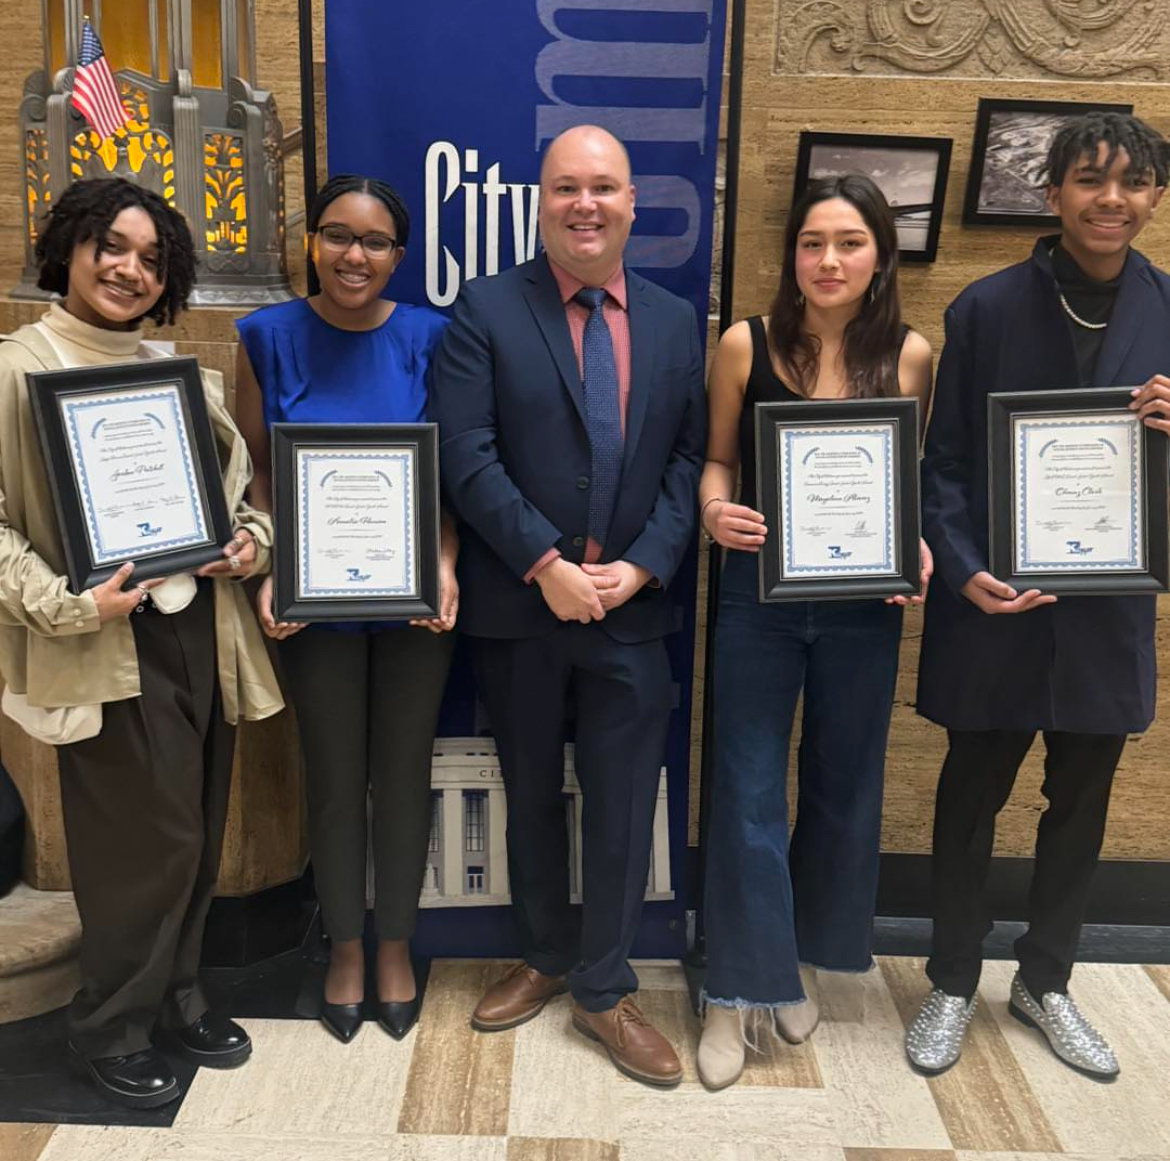 Social Justice Youth Award winners pose with Principal Christopher Aguinaga. The awards ceremony took place at the City Commision meeting. 
